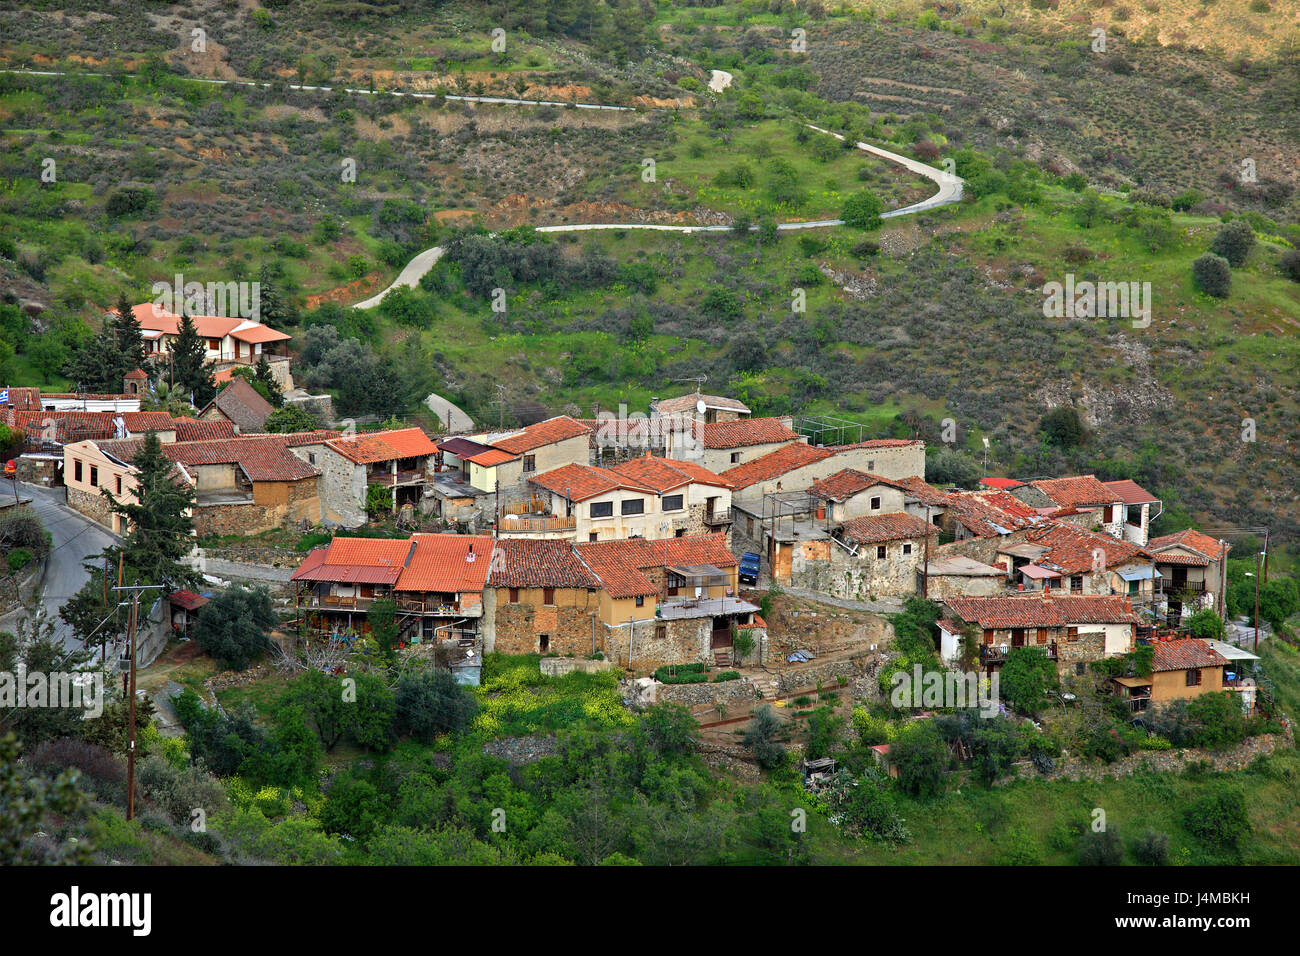 Lazanias village, one of the most beautiful and preserved mountainous villages of Cyprus, in the district of Nicosia (Lefkosia) Stock Photo